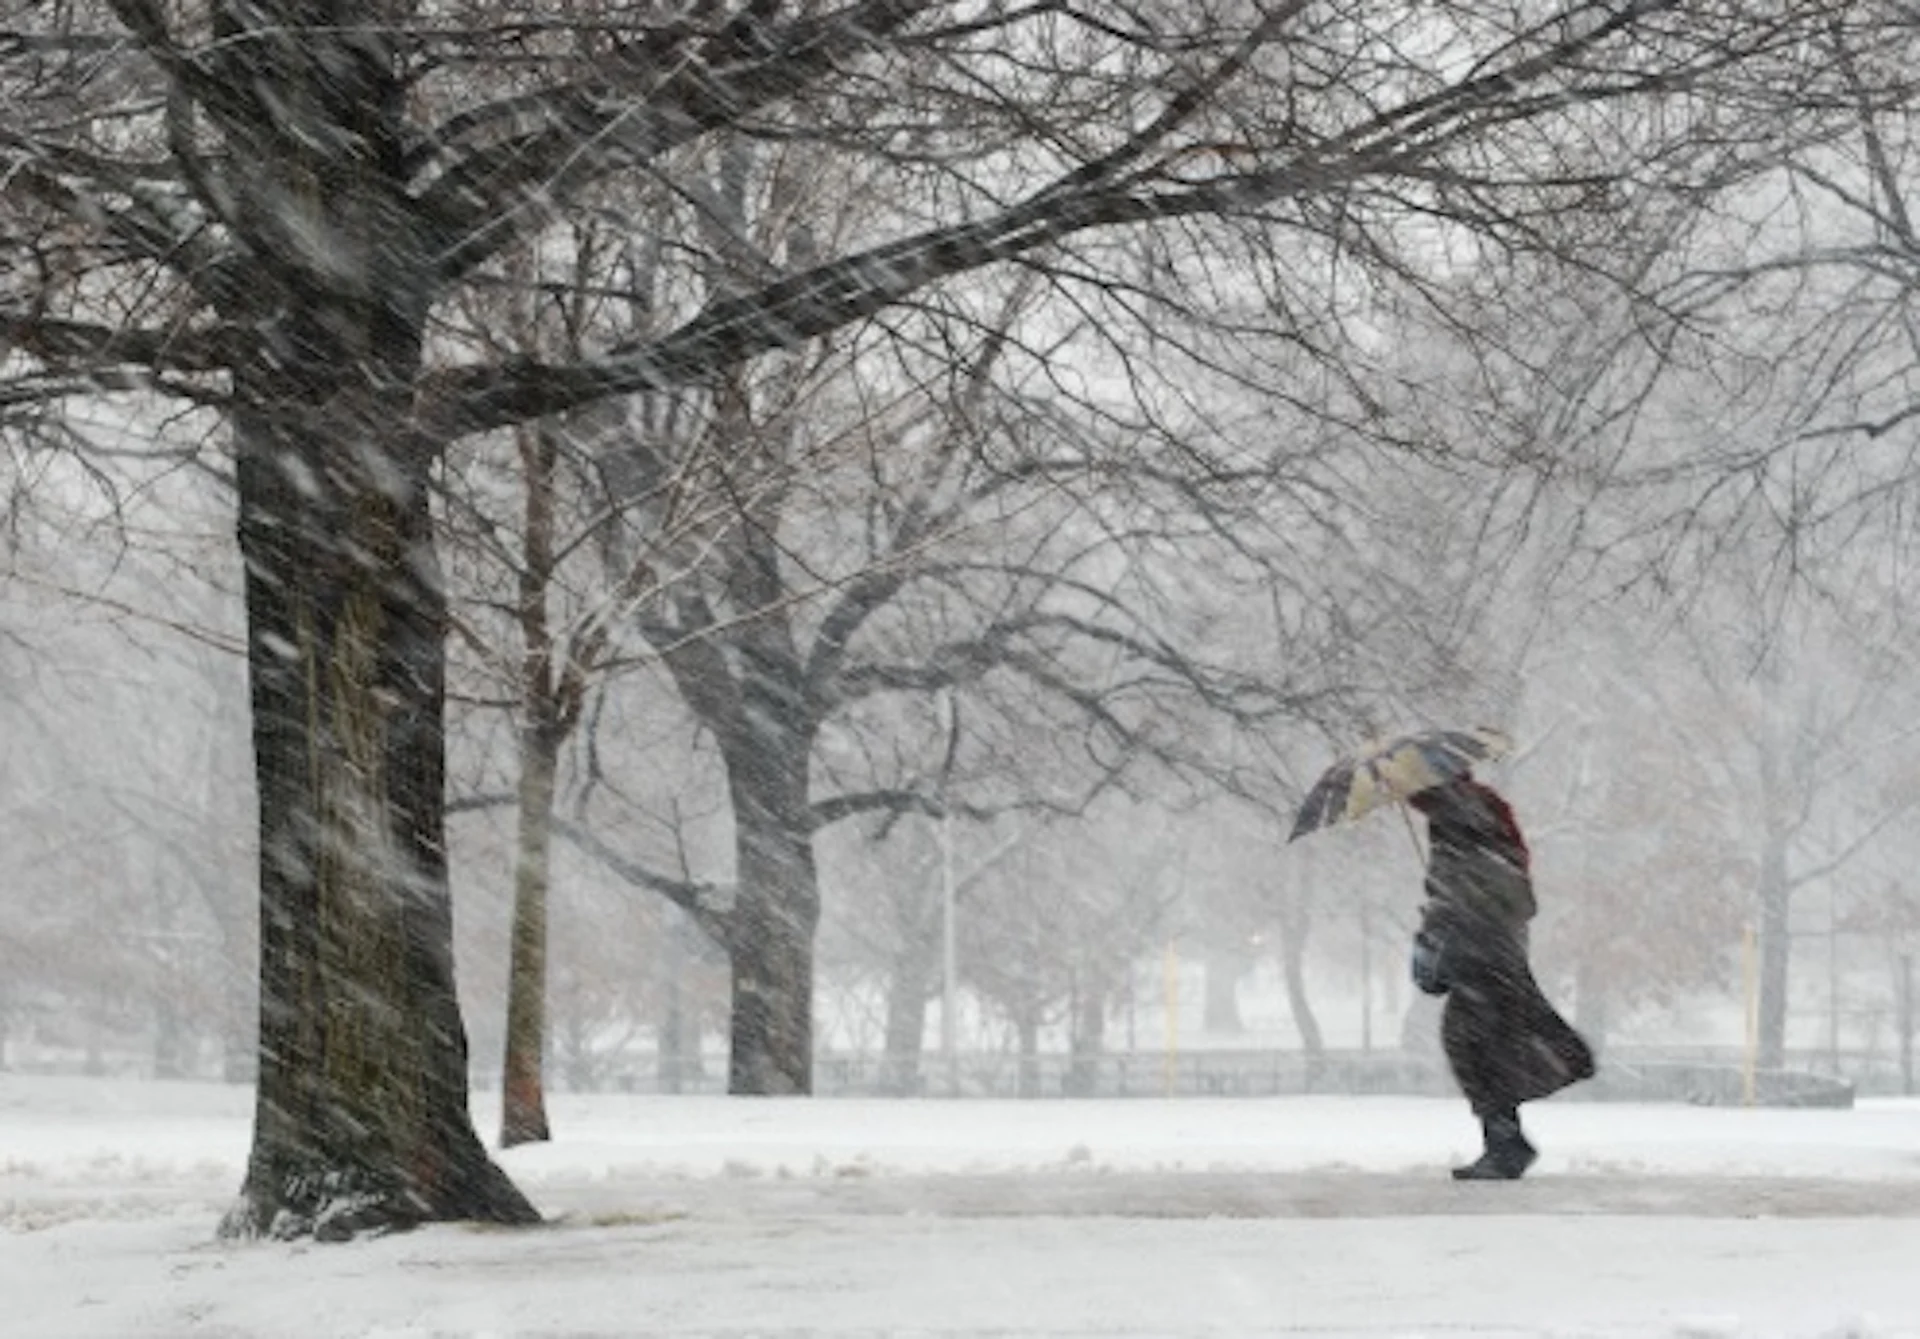 Snow totals pile up further in Ontario as lake-effect goes to work